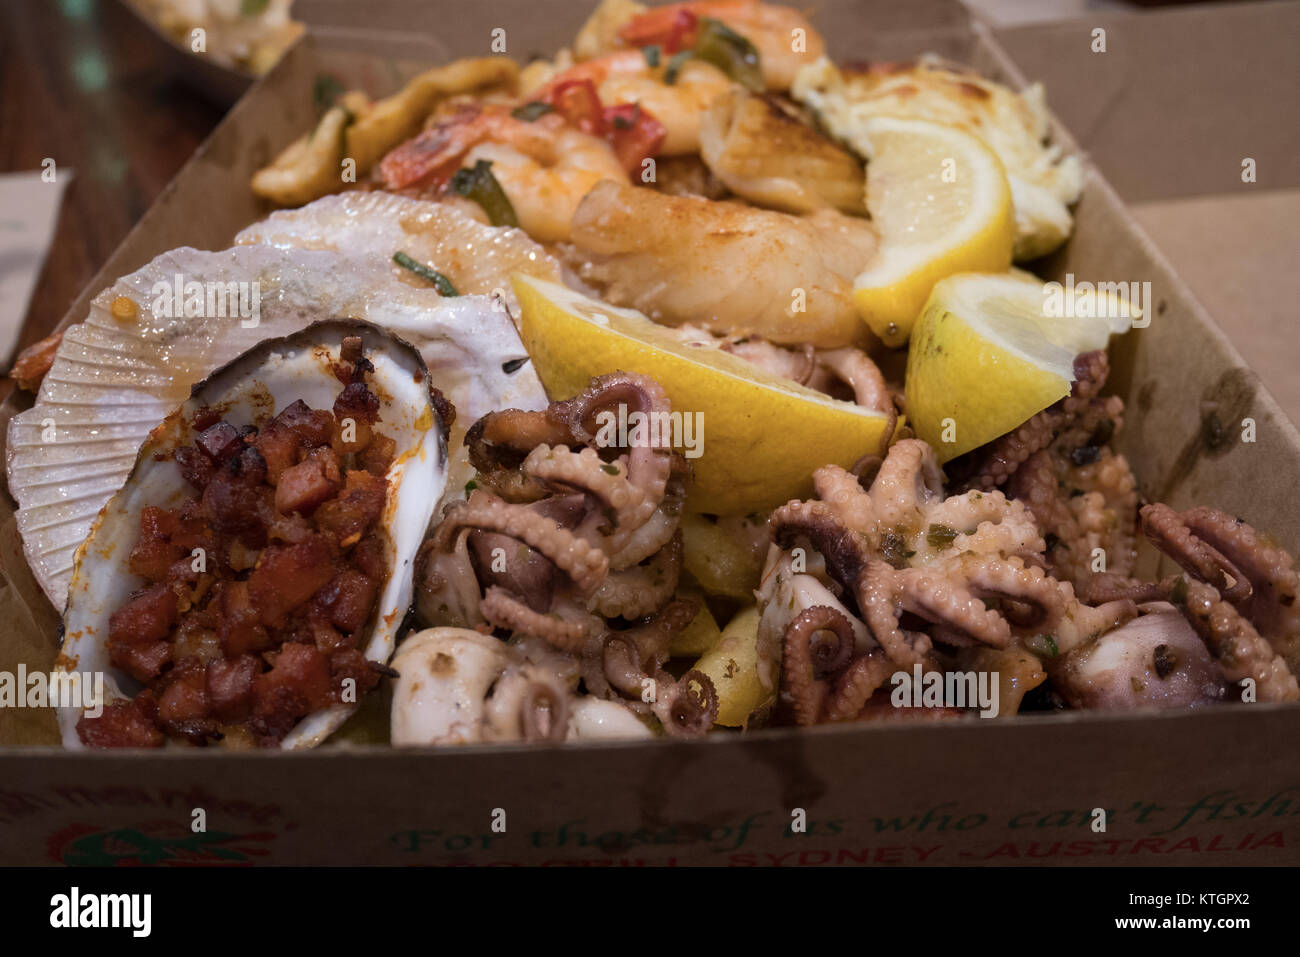 Grilled seafood platter Stock Photo